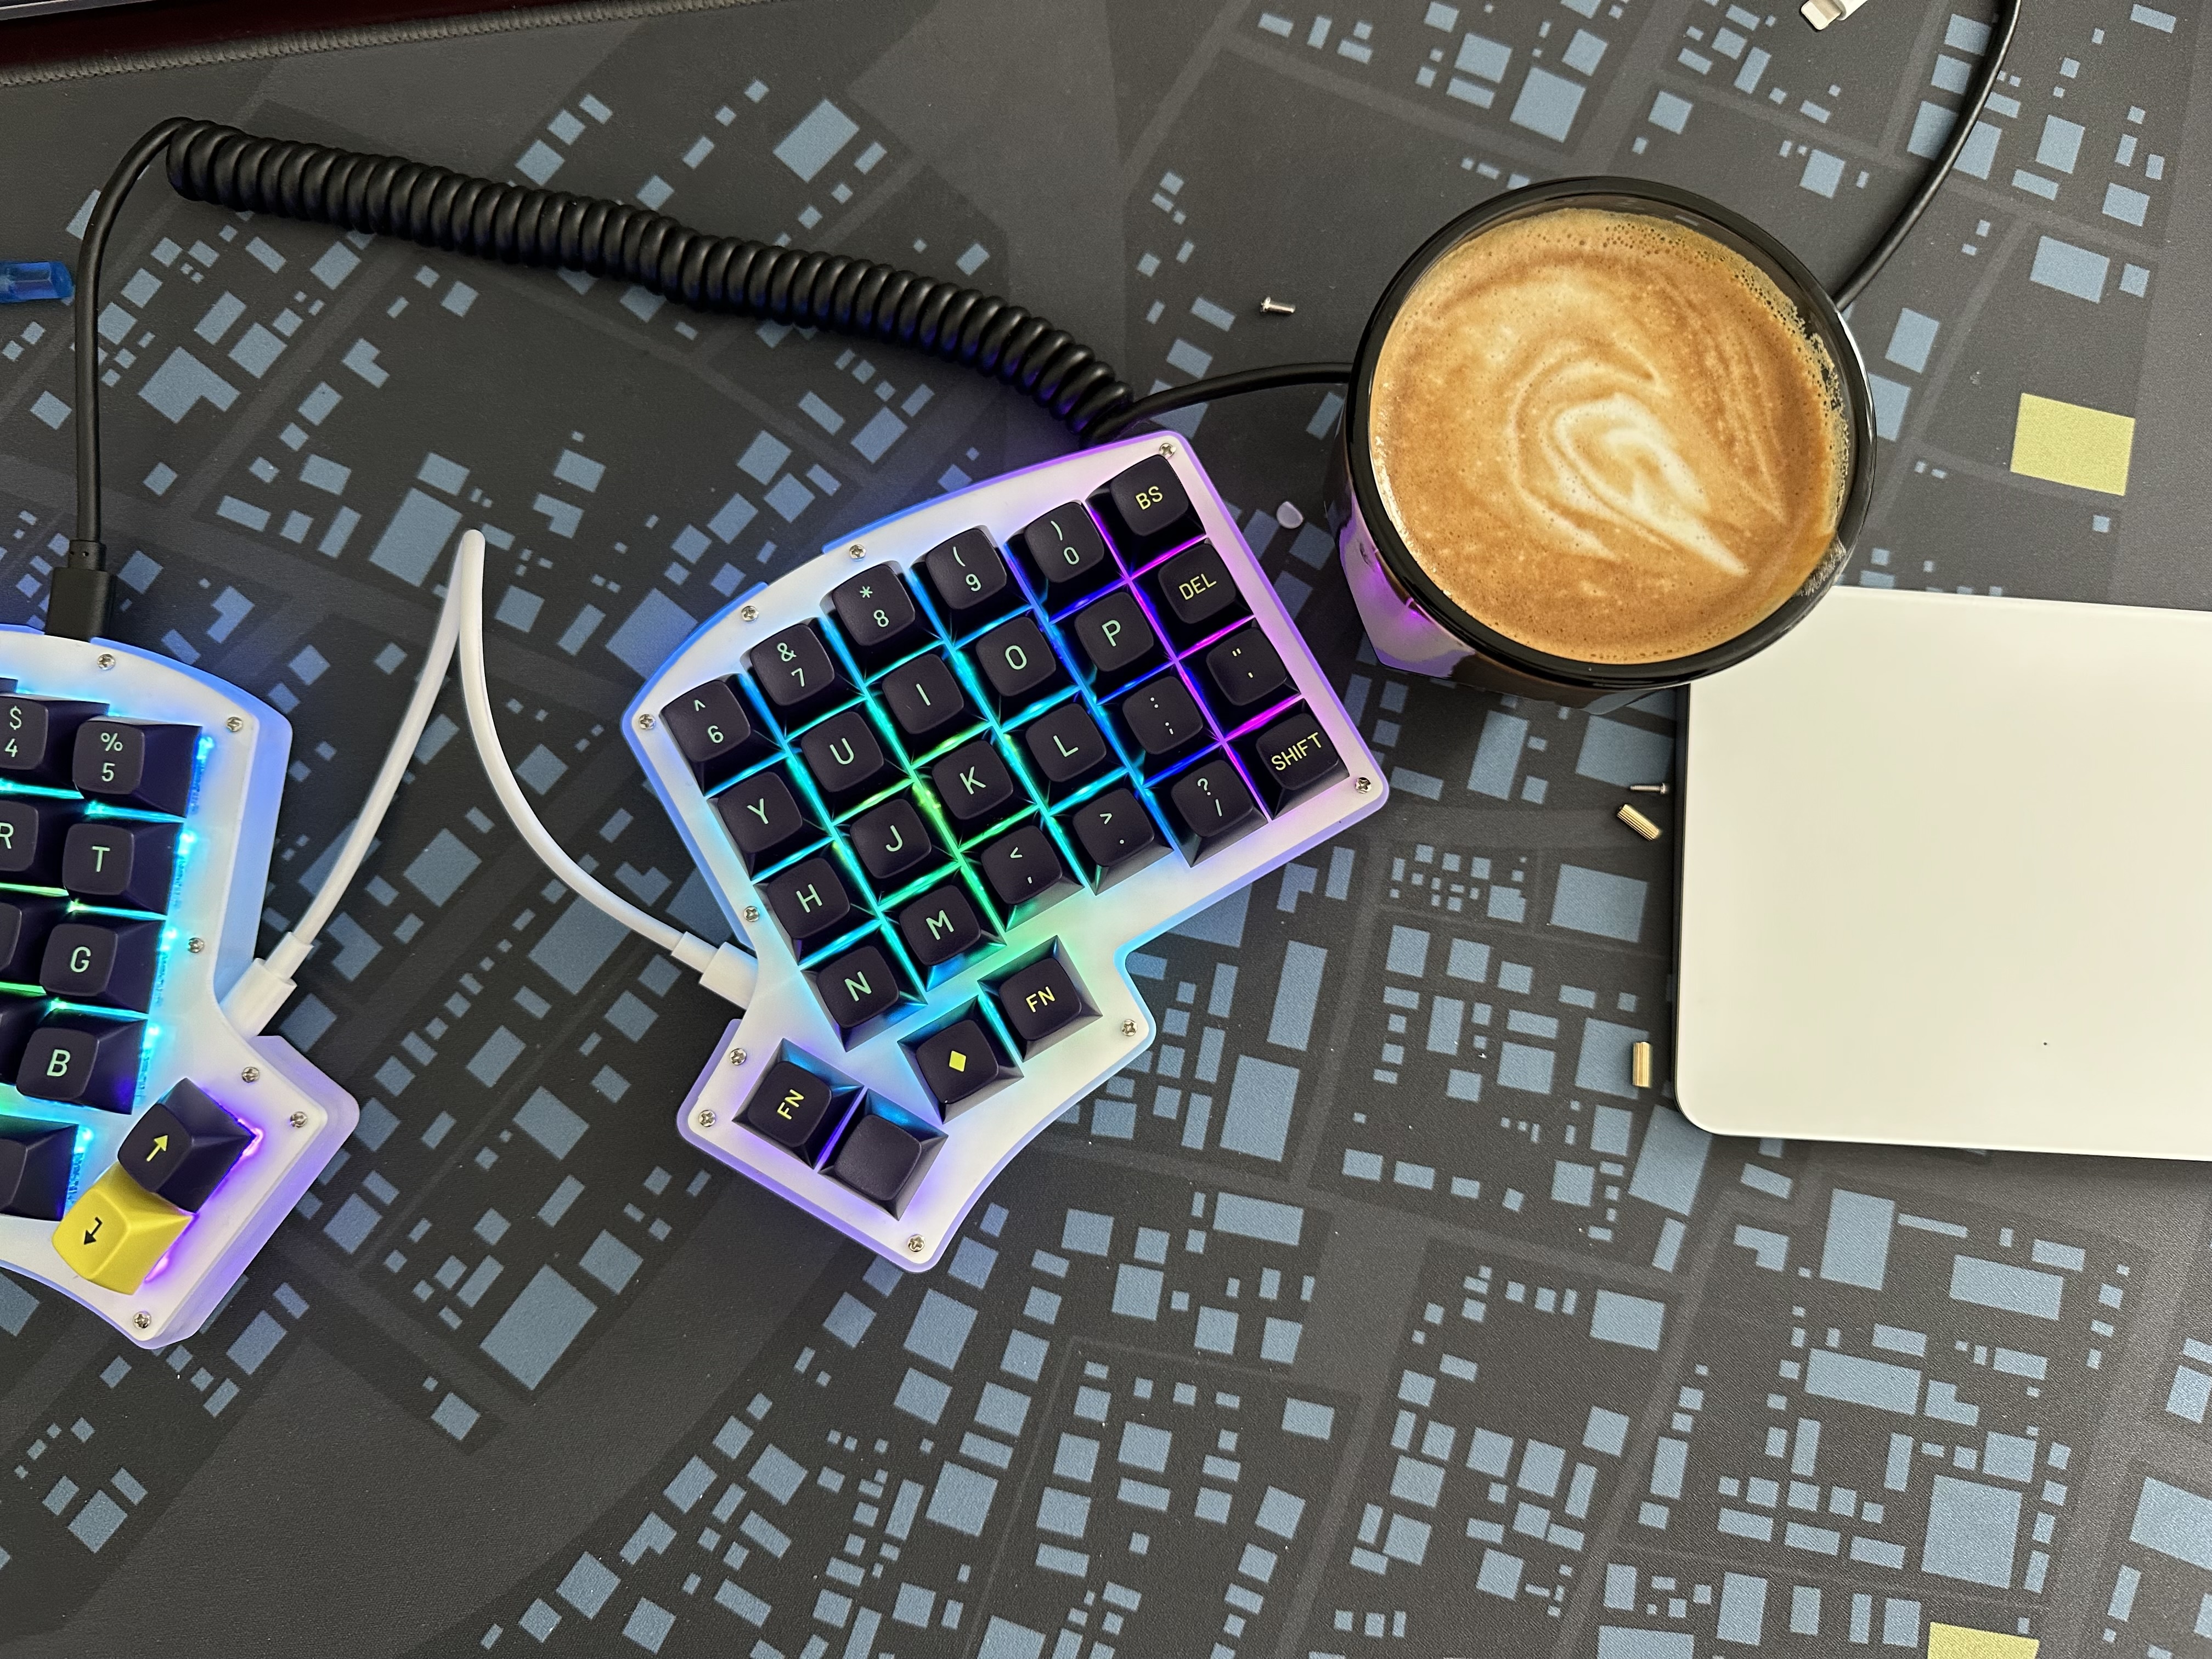 A top down view of a split ergonomic keyboard, the Keeb.io Iris. It has backlit keys on a white plastic top plate and dark blue keys with cyan legends. Beside the keyboard is a mug of coffee with a swirl of frothed milk on top, and an Apple Magic Trackpad sits next to the coffee.